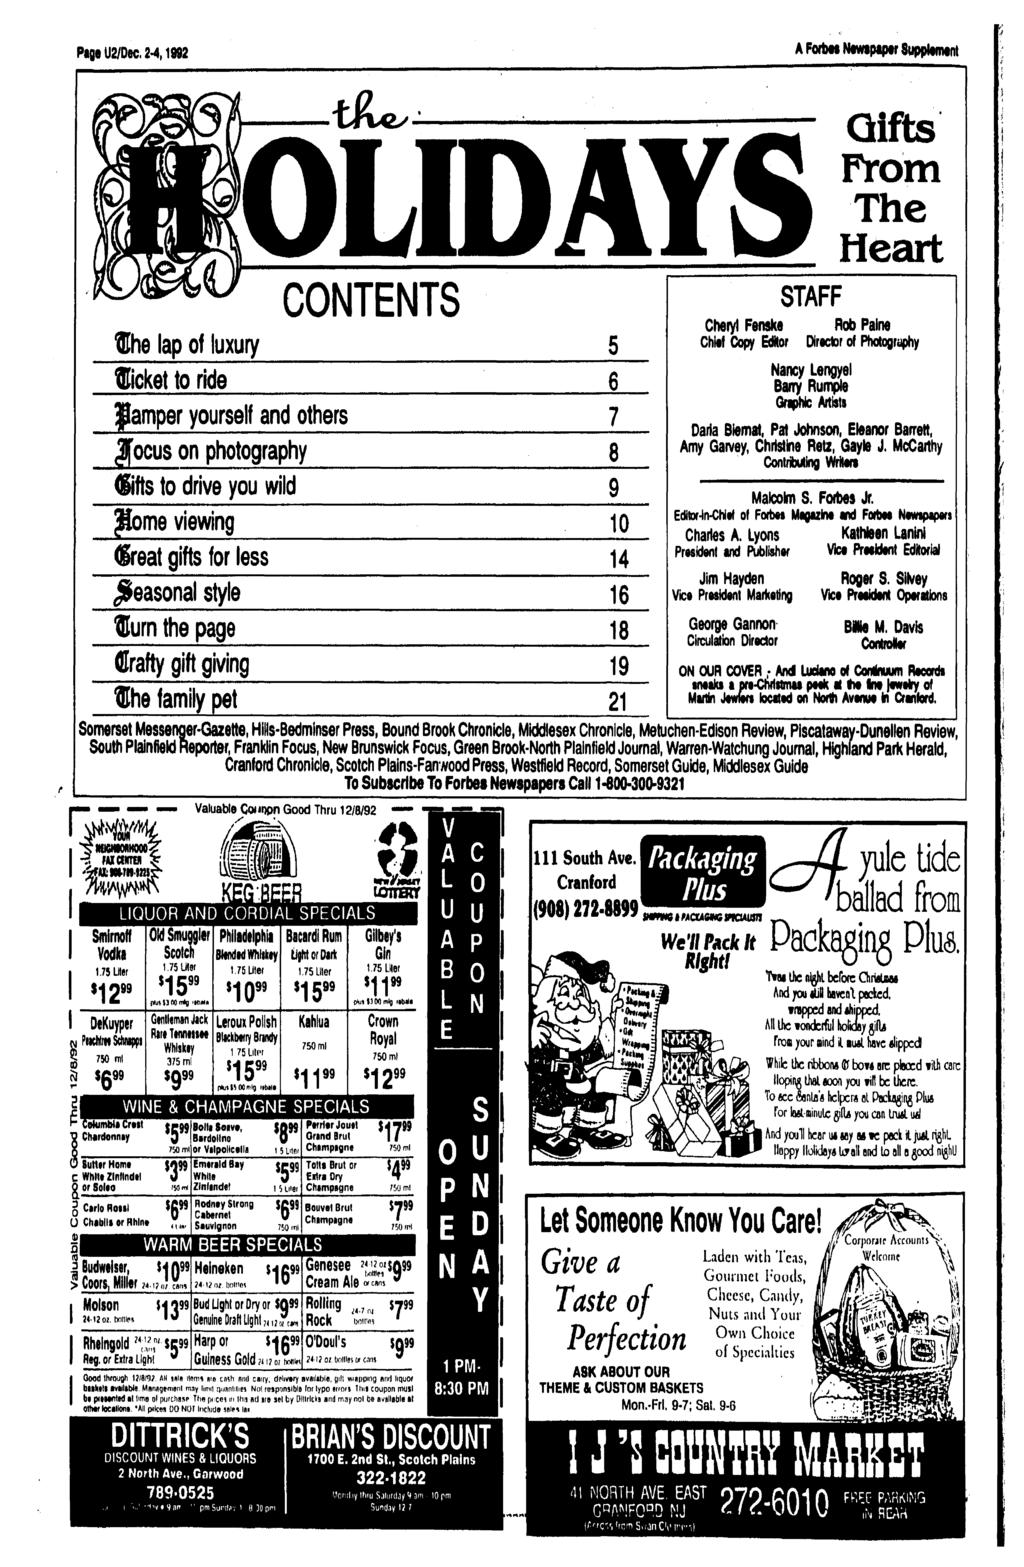 Page U2/Dec, 2-4, 1992 A Forbu Nmpipw Suppttmtnt fhe lap of luxury ticket to ride pamper yourself and others Jfocus on photography (Sifts to drive you wild Jlome viewing (great gifts for less